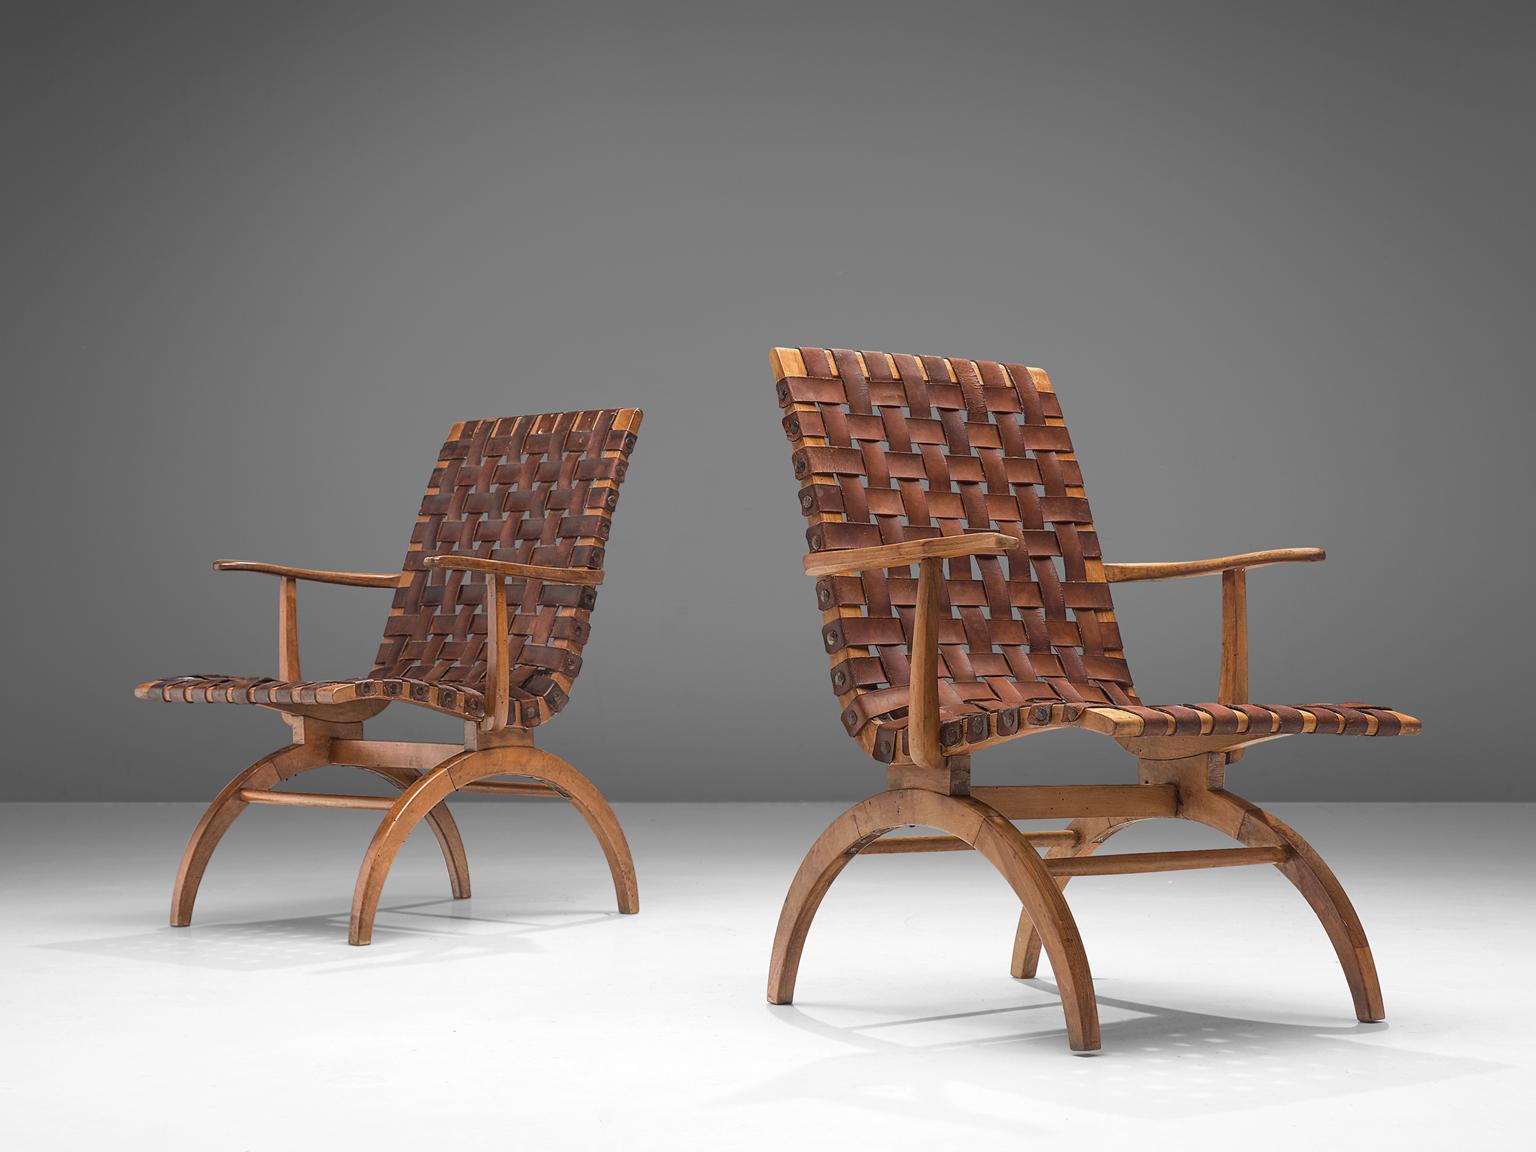 Pair of Spanish armchairs, elmwood and patinated leather, Spain, 1960s

A pair of Spanish midcentury leather strap armchairs in patinated cognac leather with woven seats. The wonderfully carved wood bases are slim and elegant, which reminds of the